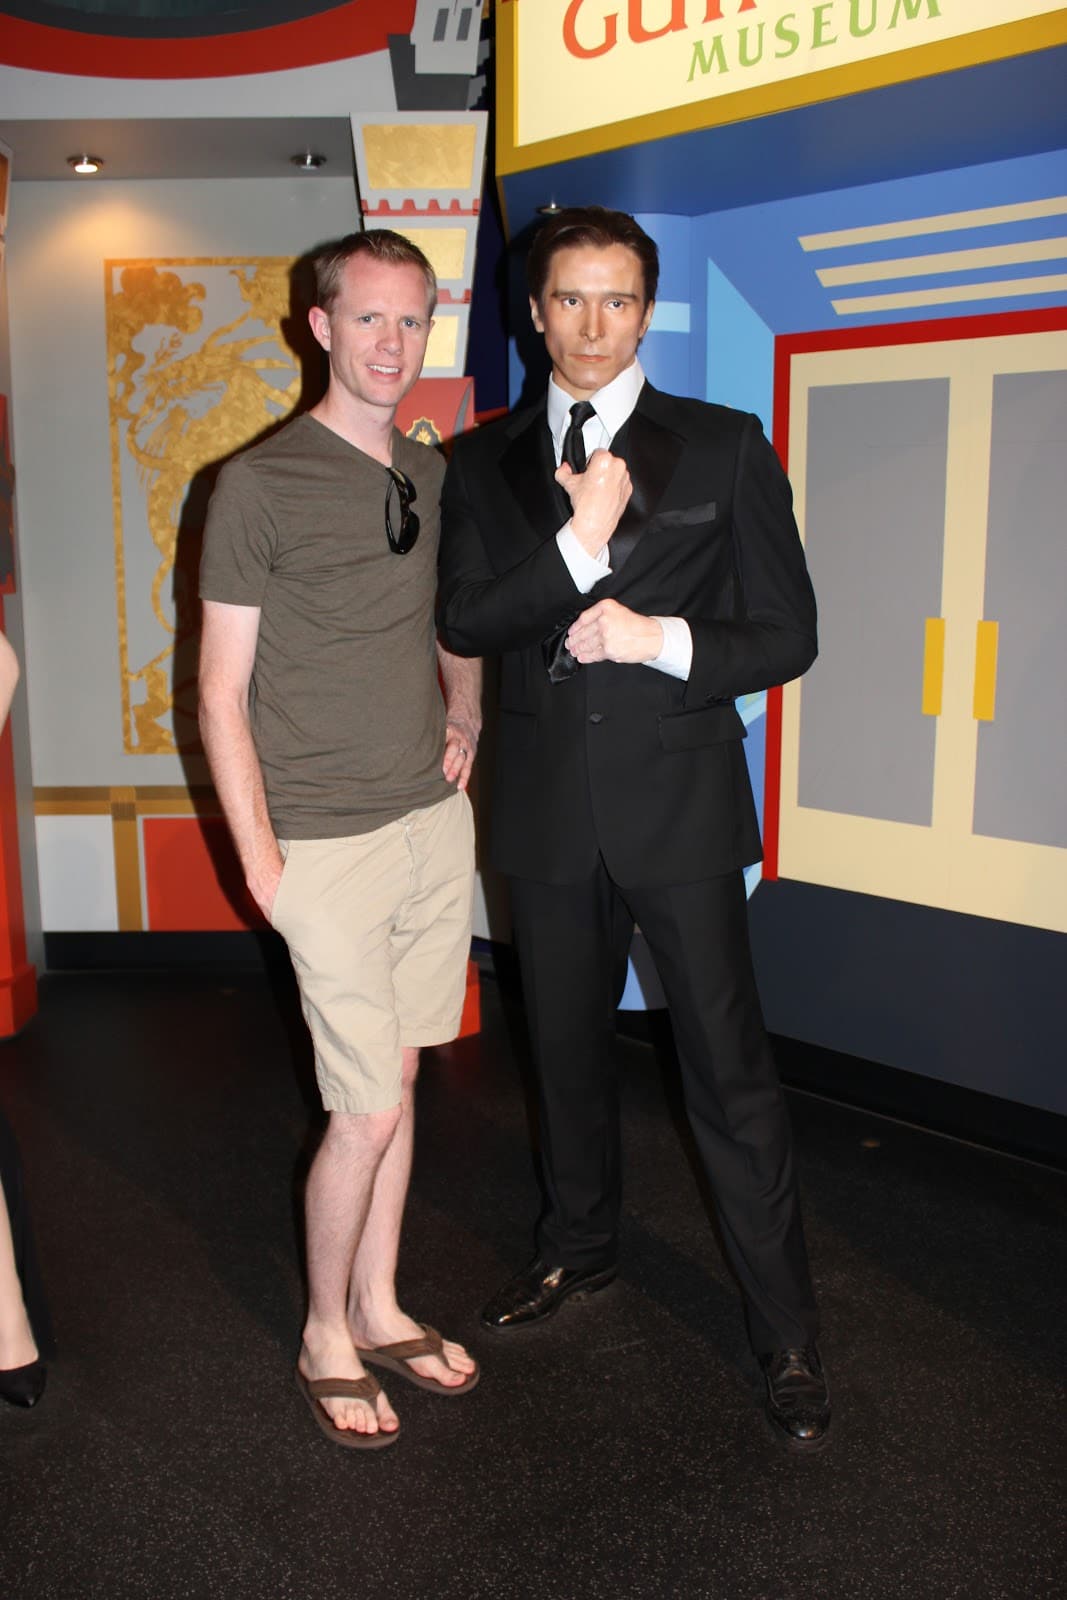 Visiting the Hollywood Wax Museum. 